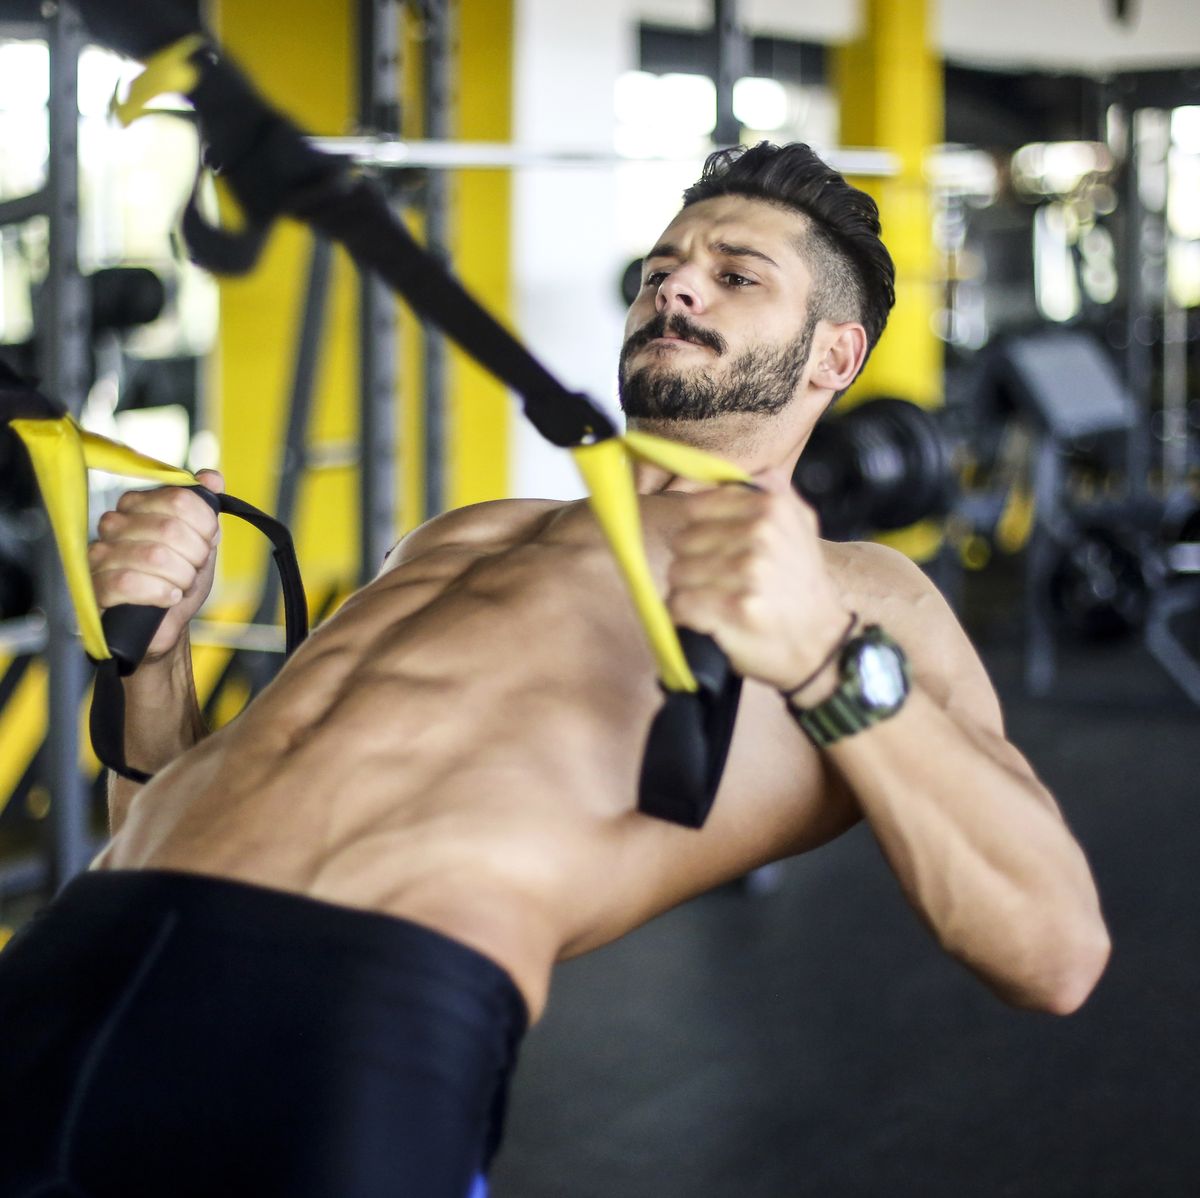 Lose weight by doing these TRX fat-burning exercises